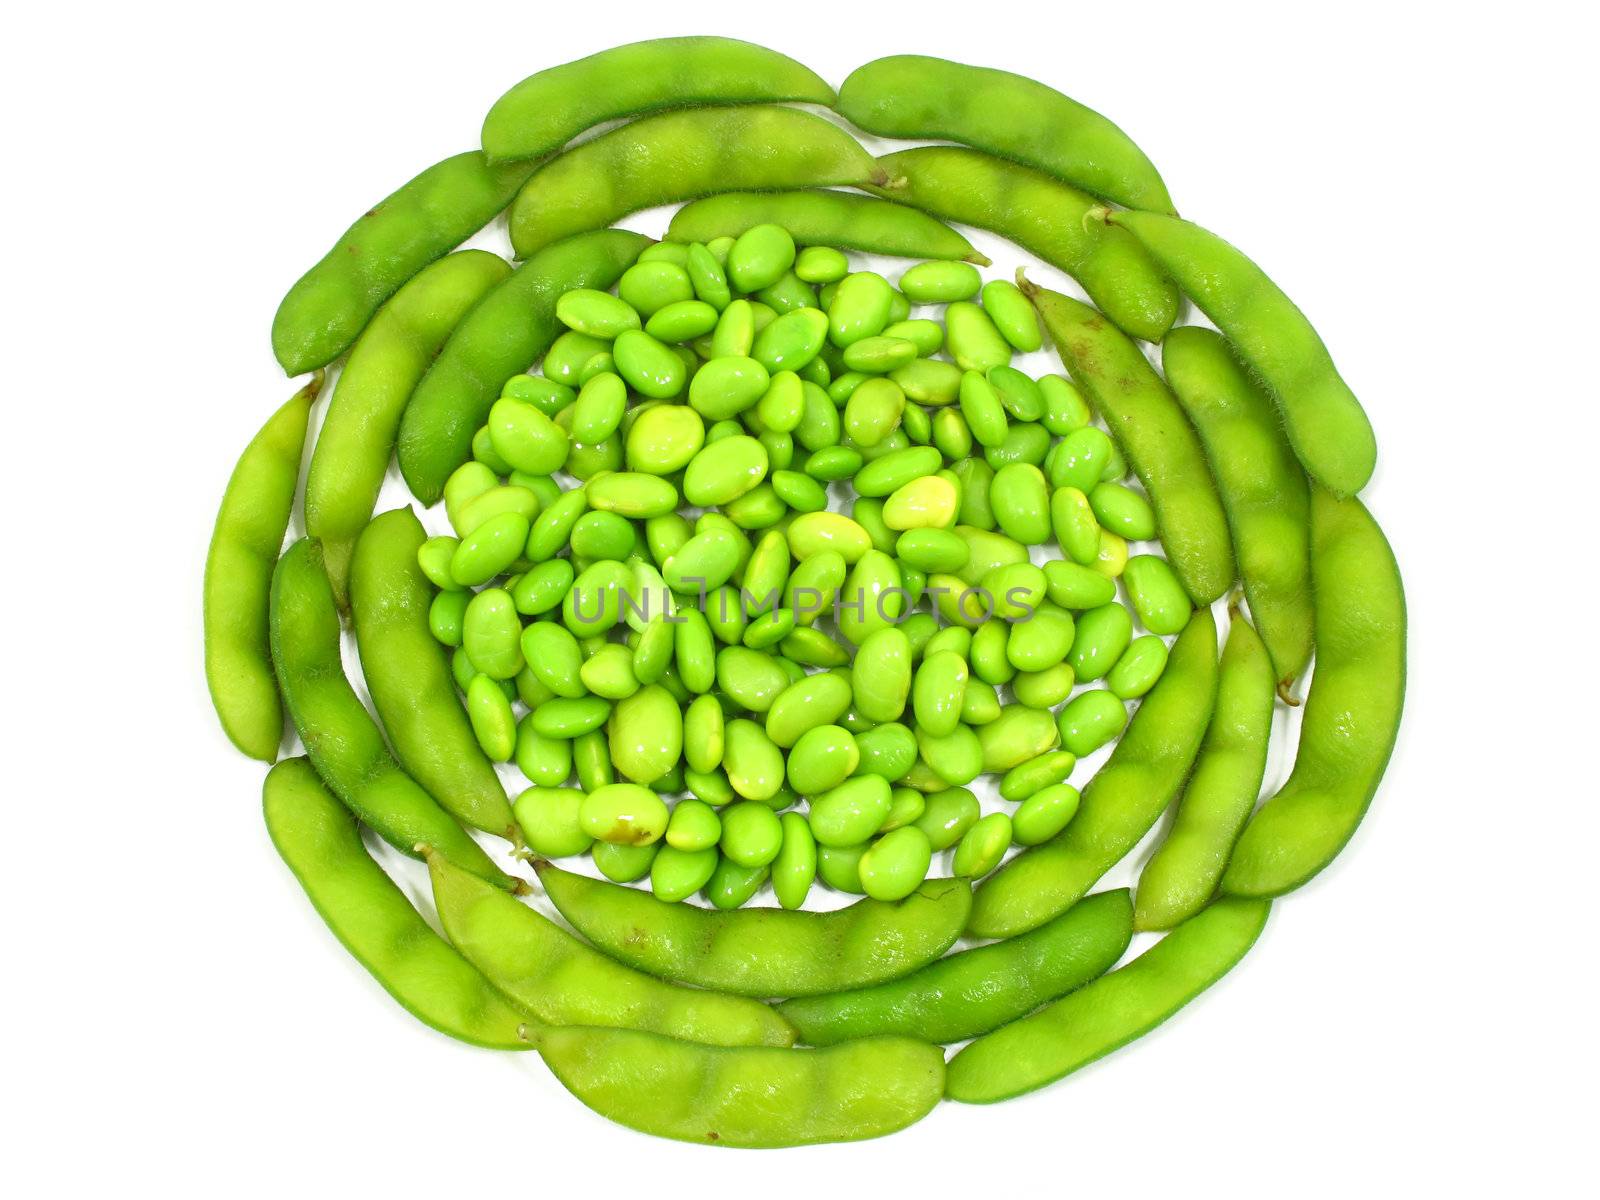 Edamame soy beans shelled and pods on white background